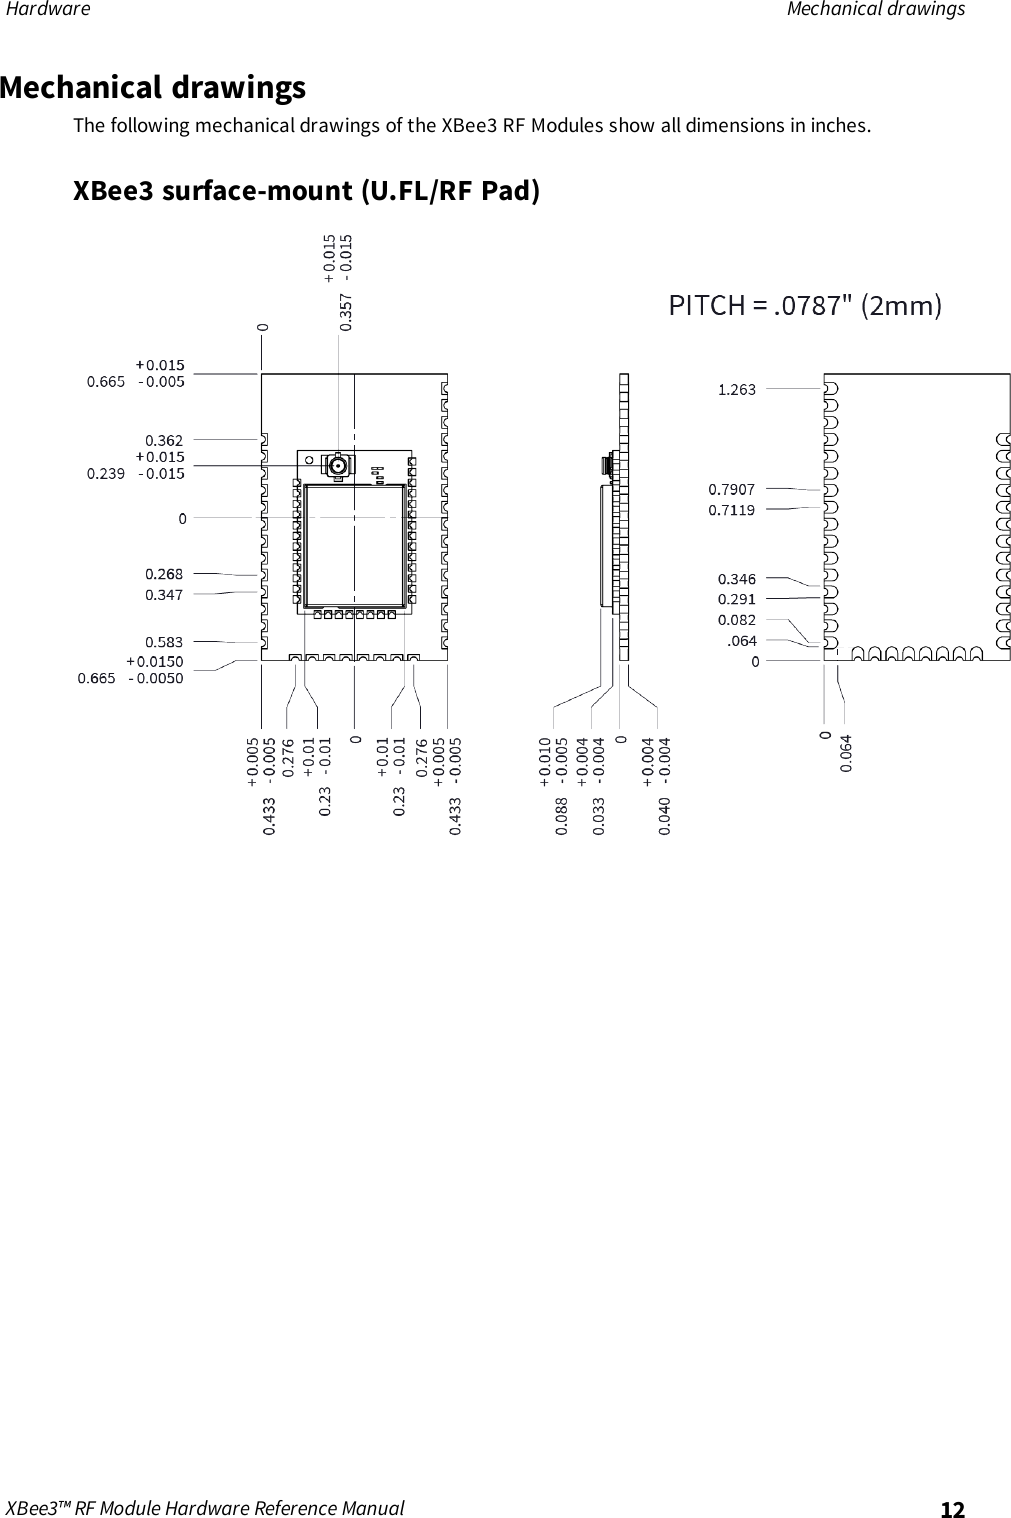 Hardware Mechanical drawingsXBee3™ RF Module Hardware Reference Manual 12Mechanical drawingsThe following mechanical drawings of the XBee3 RF Modules show all dimensions in inches.XBee3 surface-mount (U.FL/RF Pad)